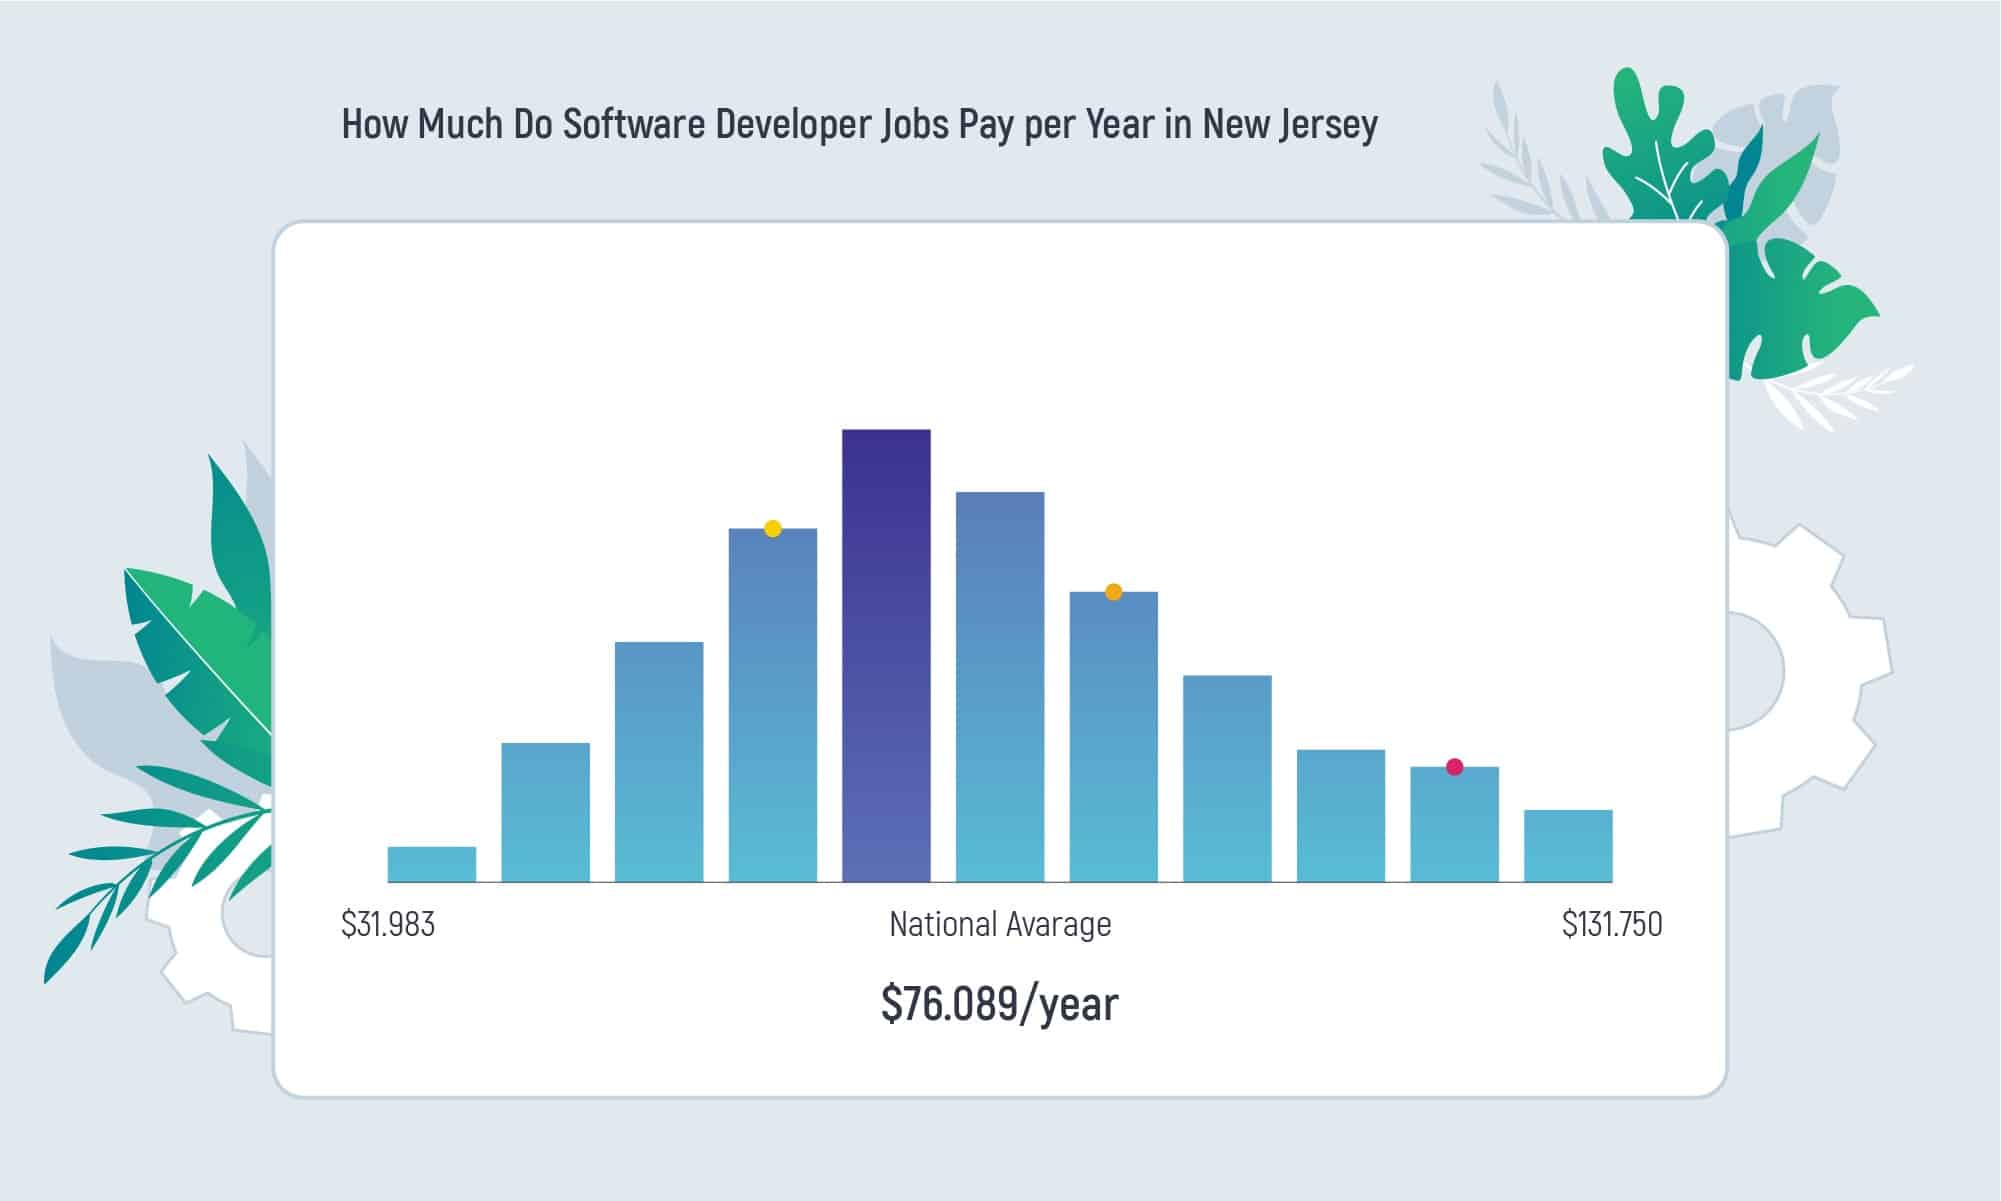 Bar chart of software developer salary per year in New Jersey (NJ)